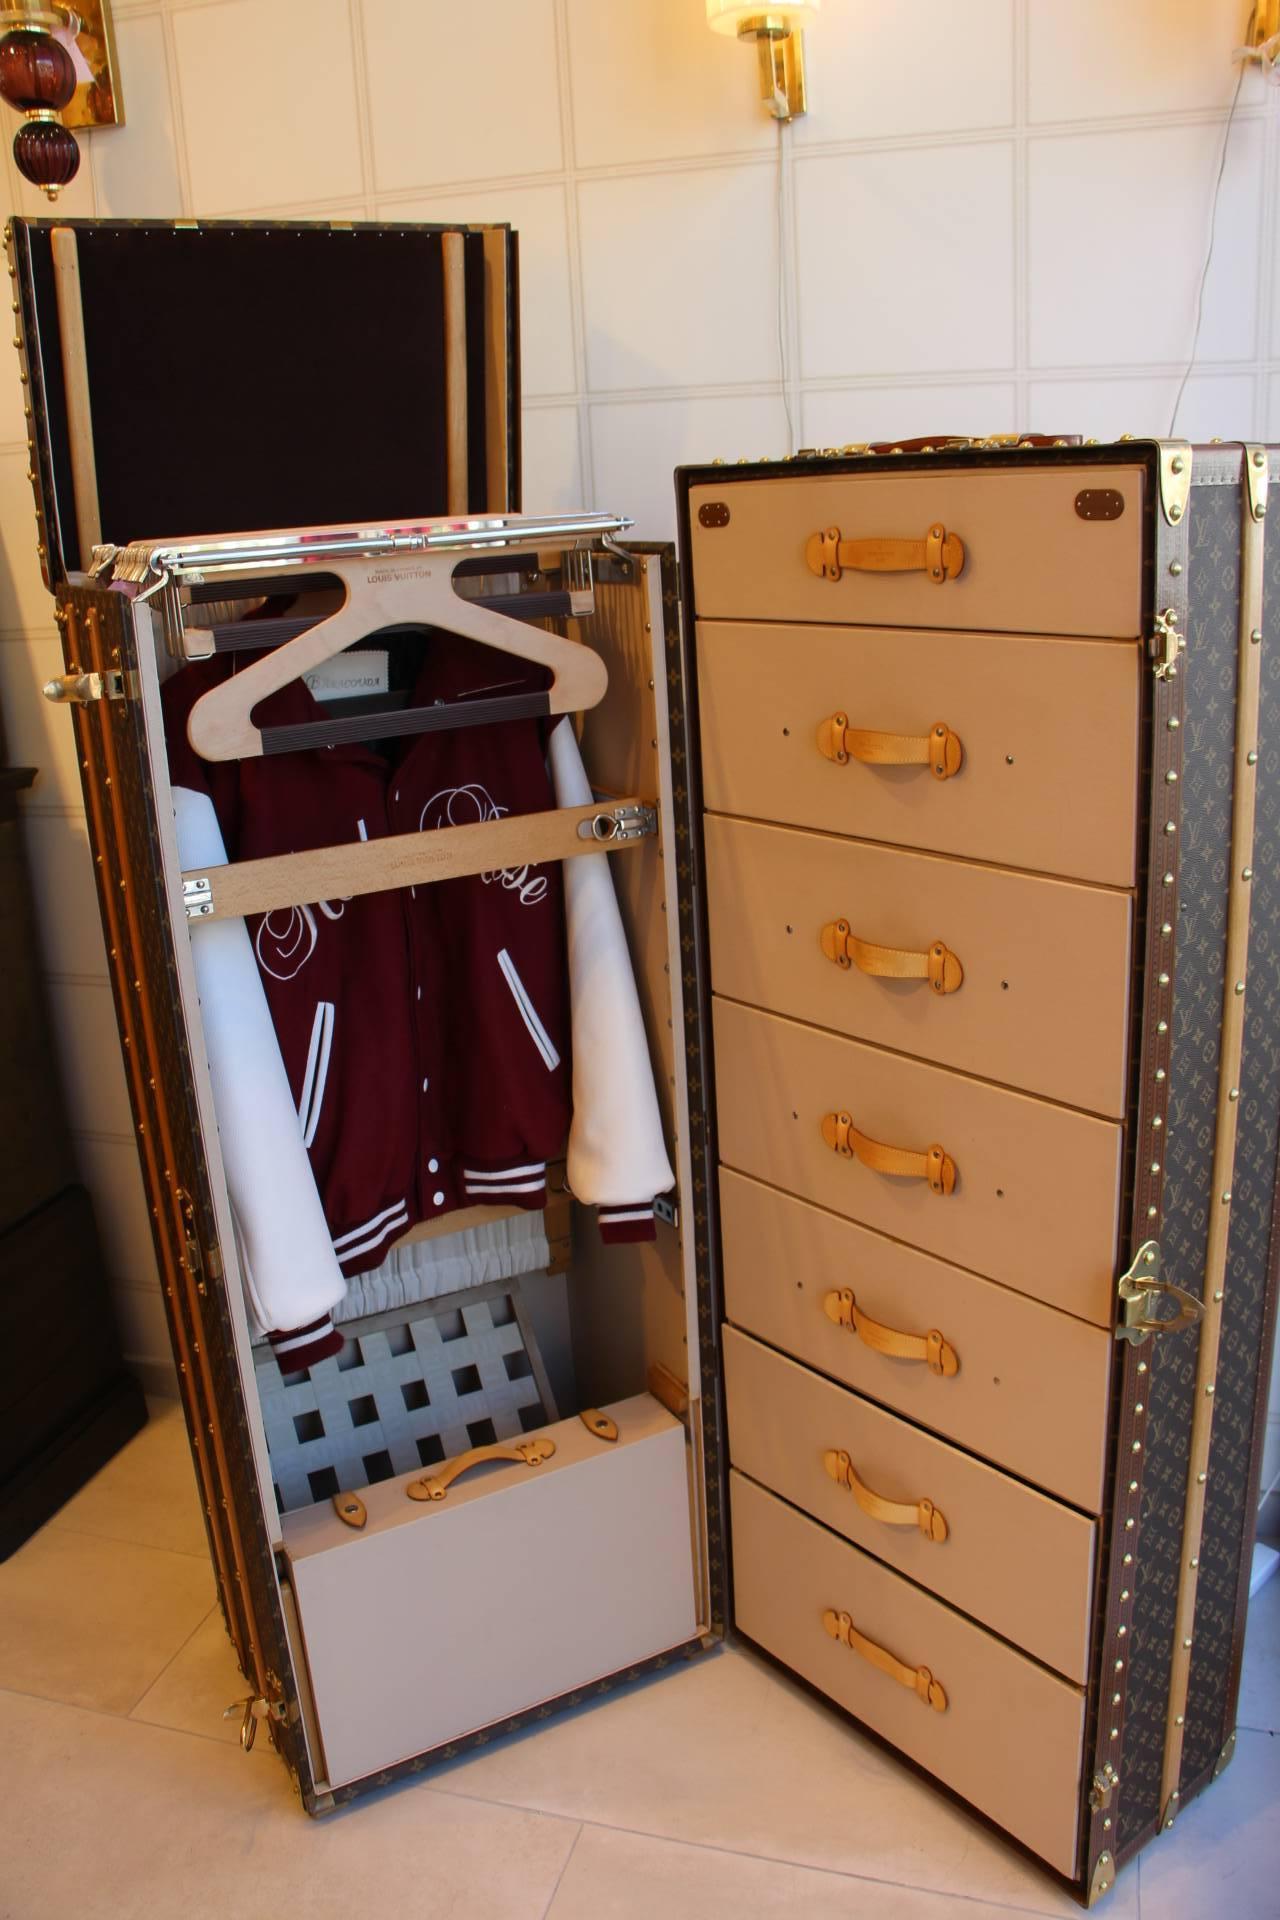 This impressive Louis Vuitton wardrobe features monogramm canvas, lozine trim, LV stamped solid brass locks and studs as well as solid brass corners.

It has got a lift top that closes thanks to two brass locks.

Its interior is remarkable with